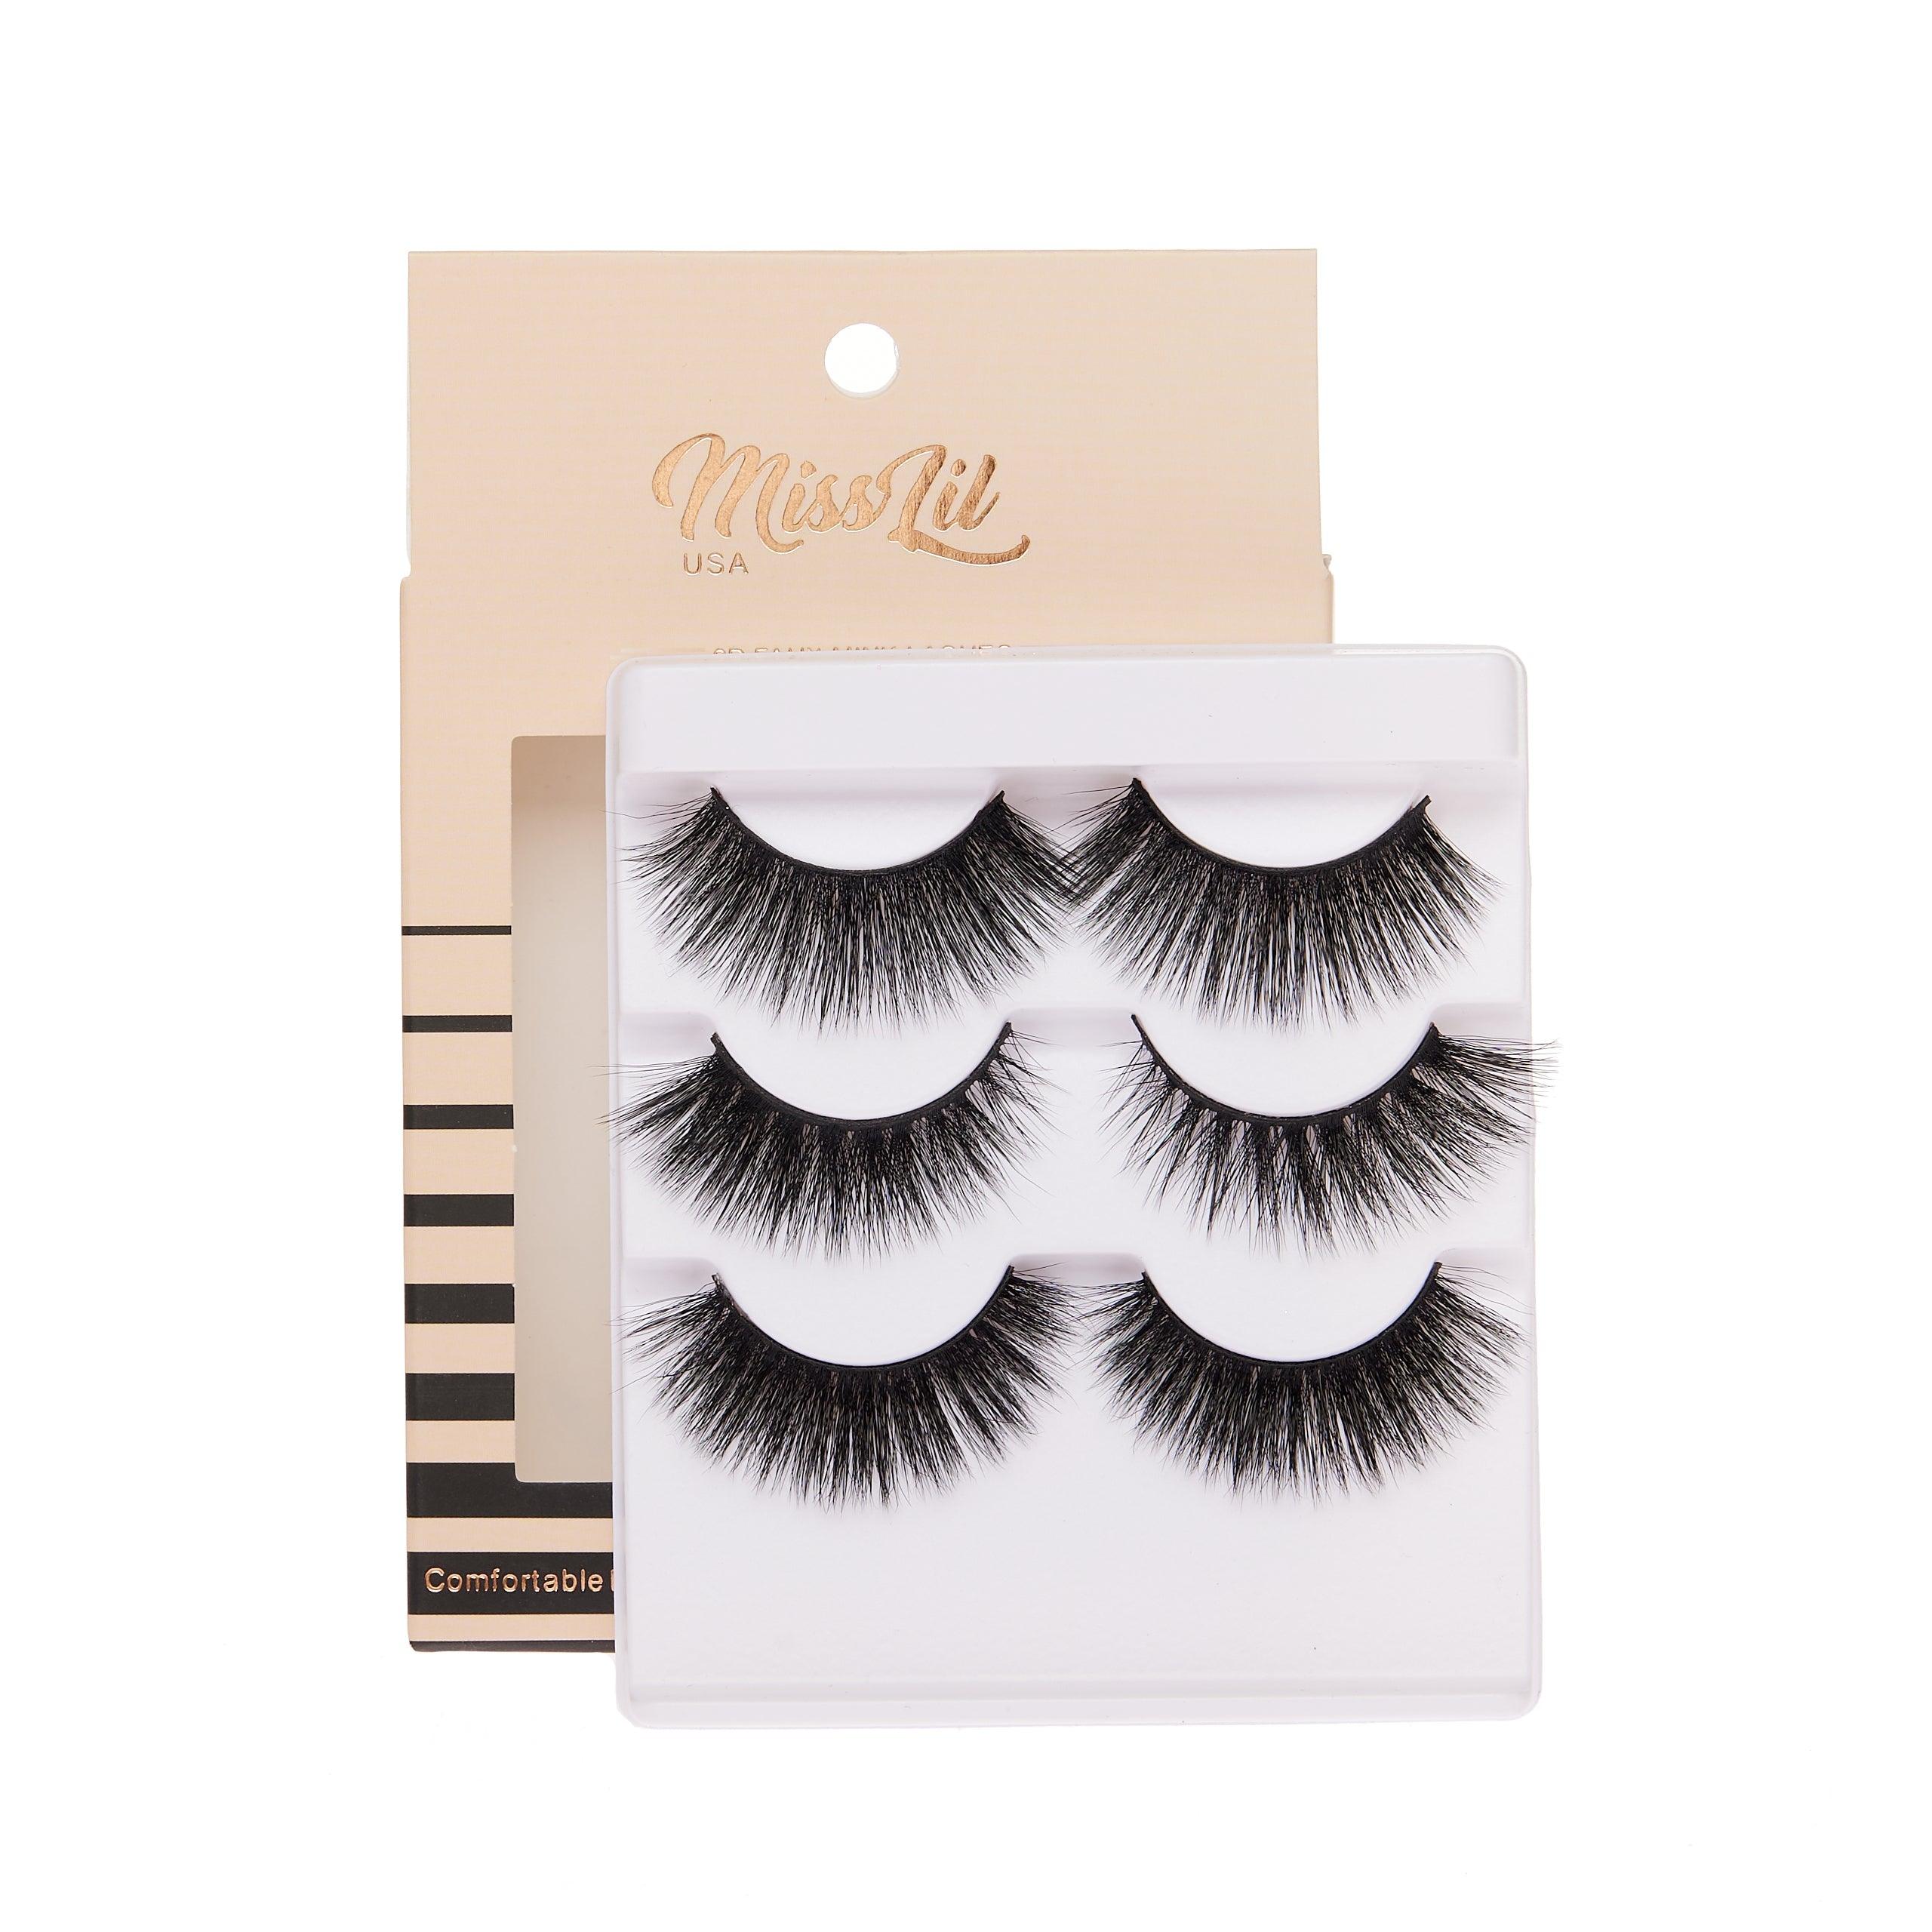 3-Pair Faux 9D Mink Eyelashes - Luxury Collection #18 - Pack of 12 - Miss Lil USA